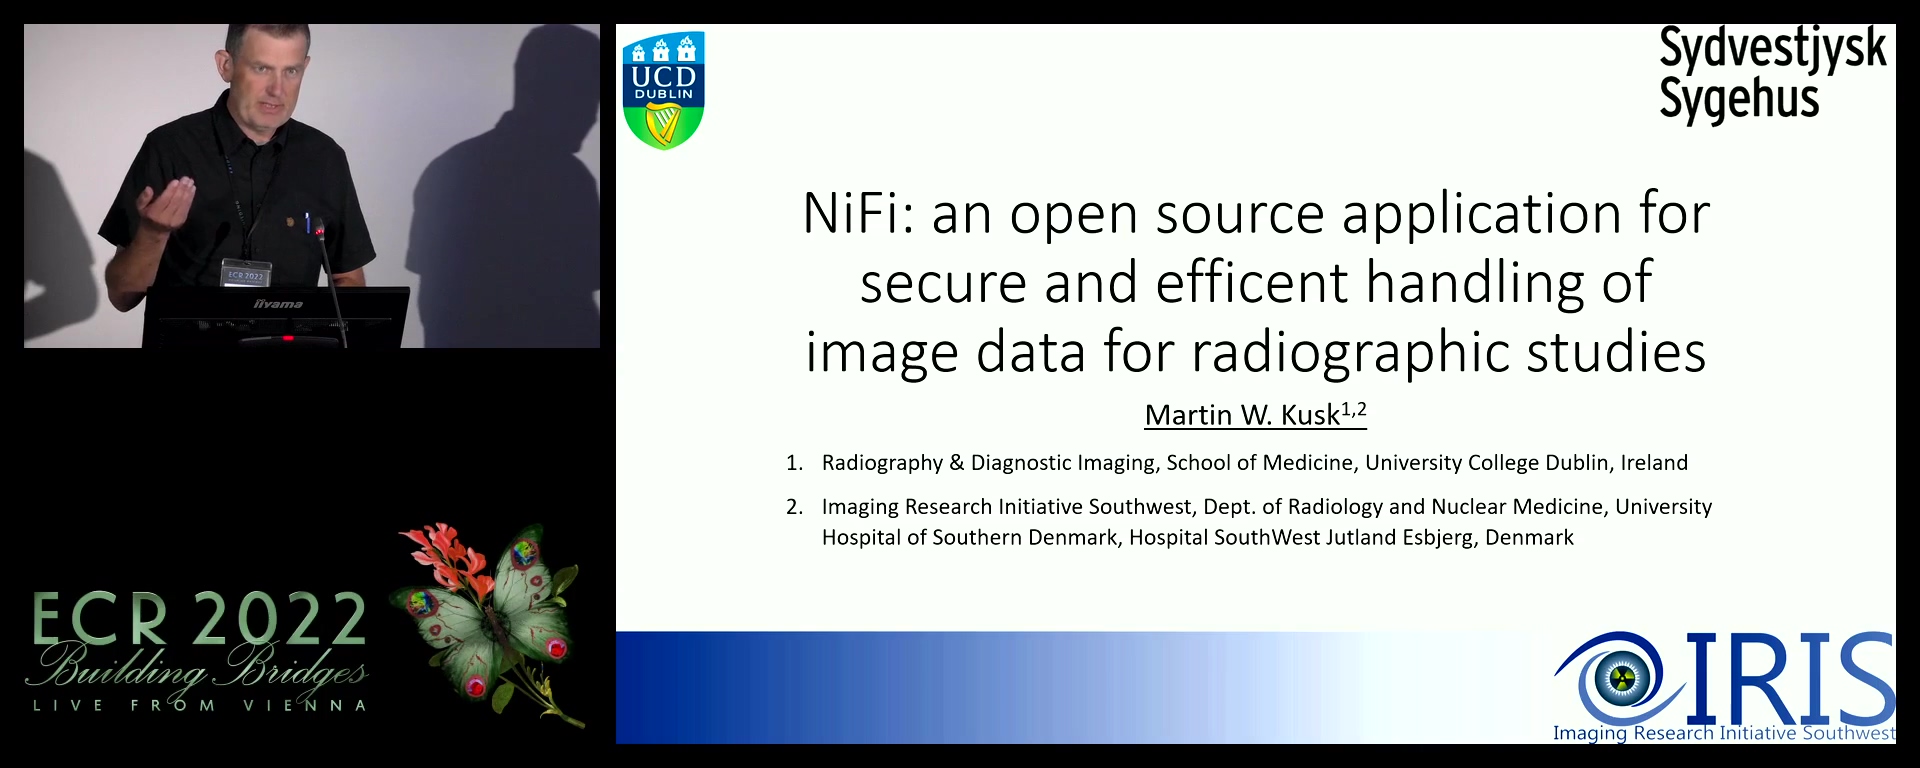 NiFi: an open source application for secure and efficent handling of image data for radiographic studies - Martin Kusk, Esbjerg / DK